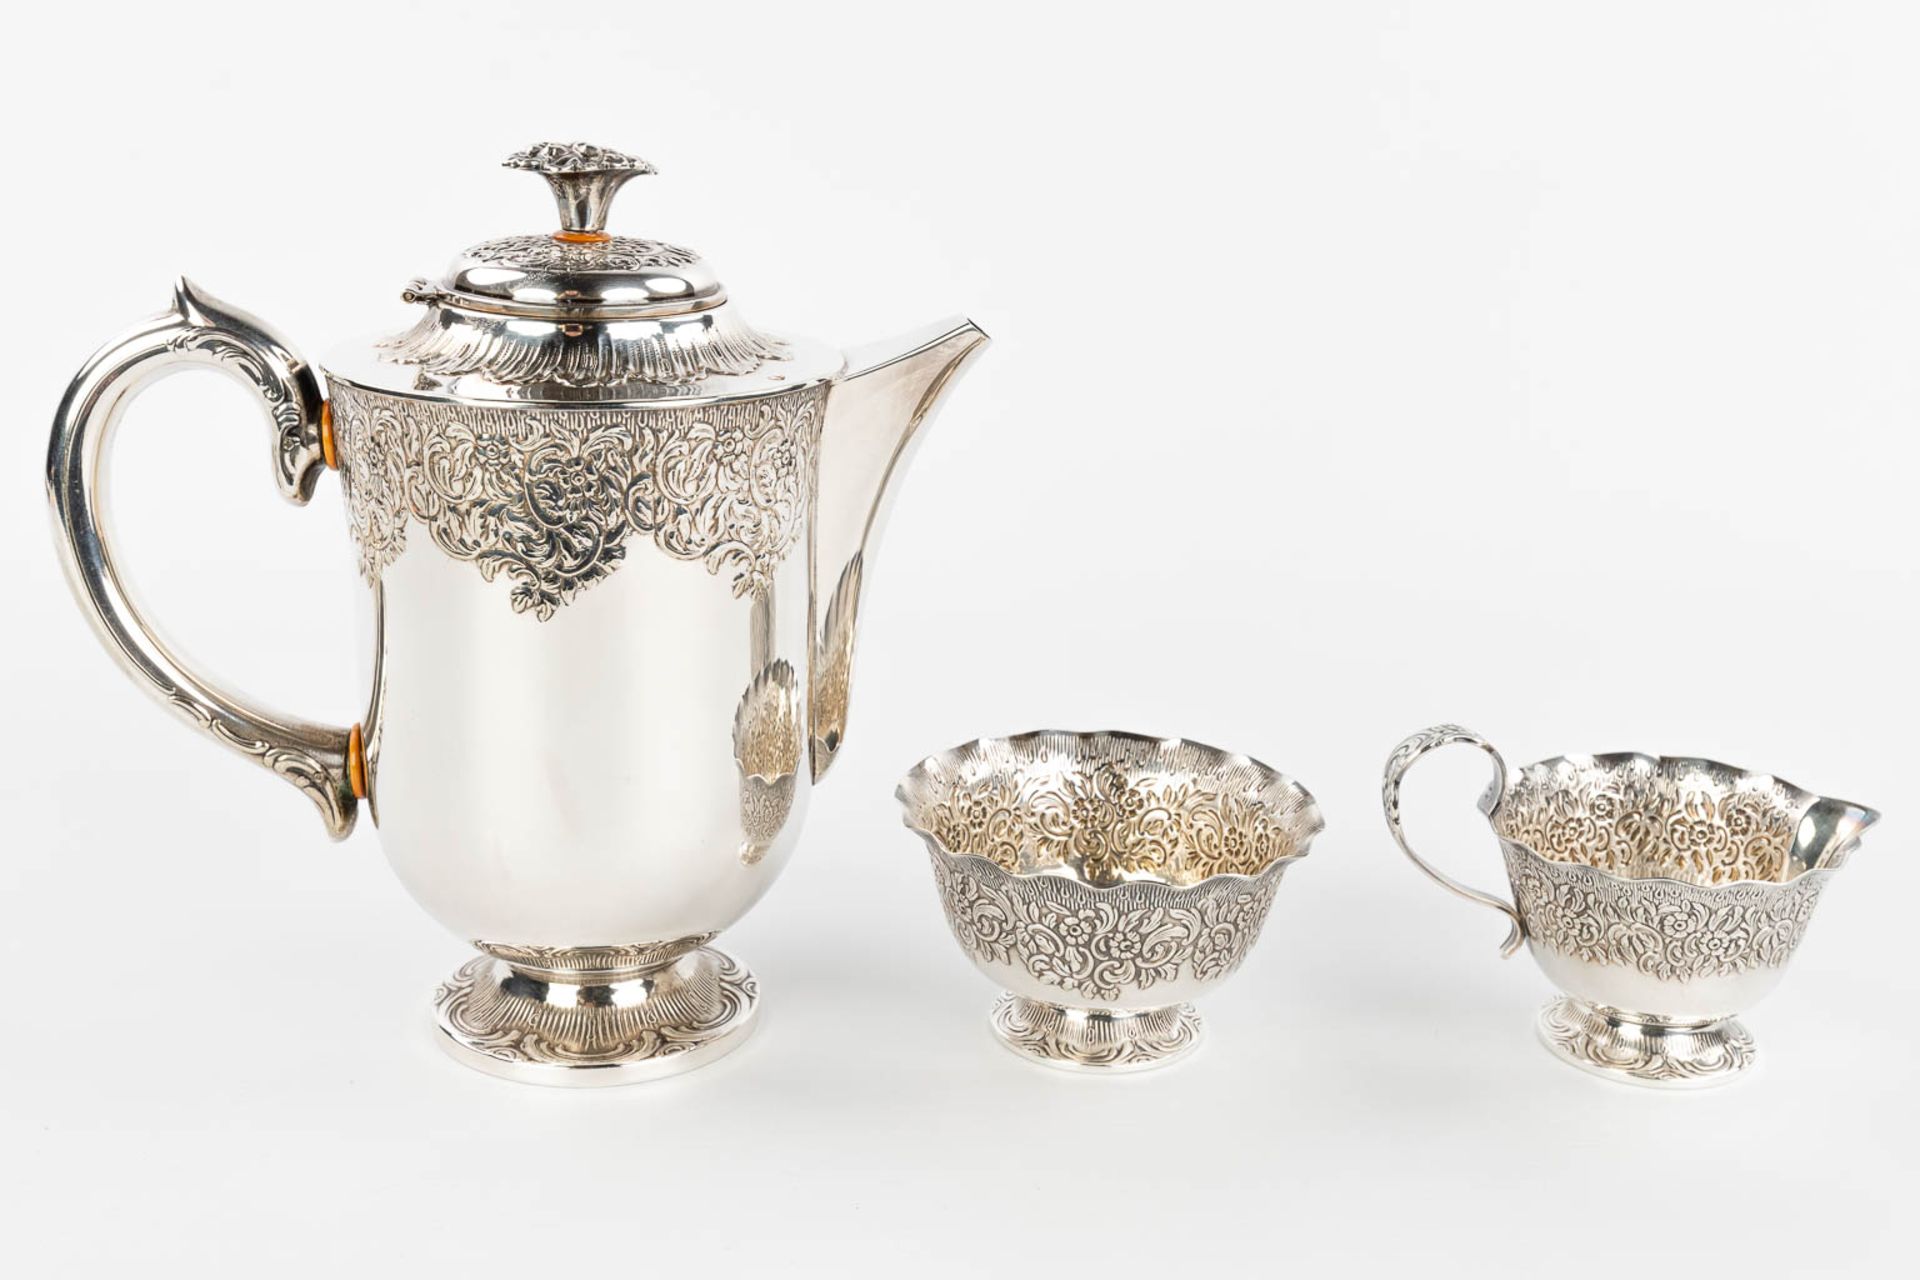 A silver-plated coffee service on a platter with sugar pot, coffee pot and milk jug. (H:22cm) - Image 12 of 18